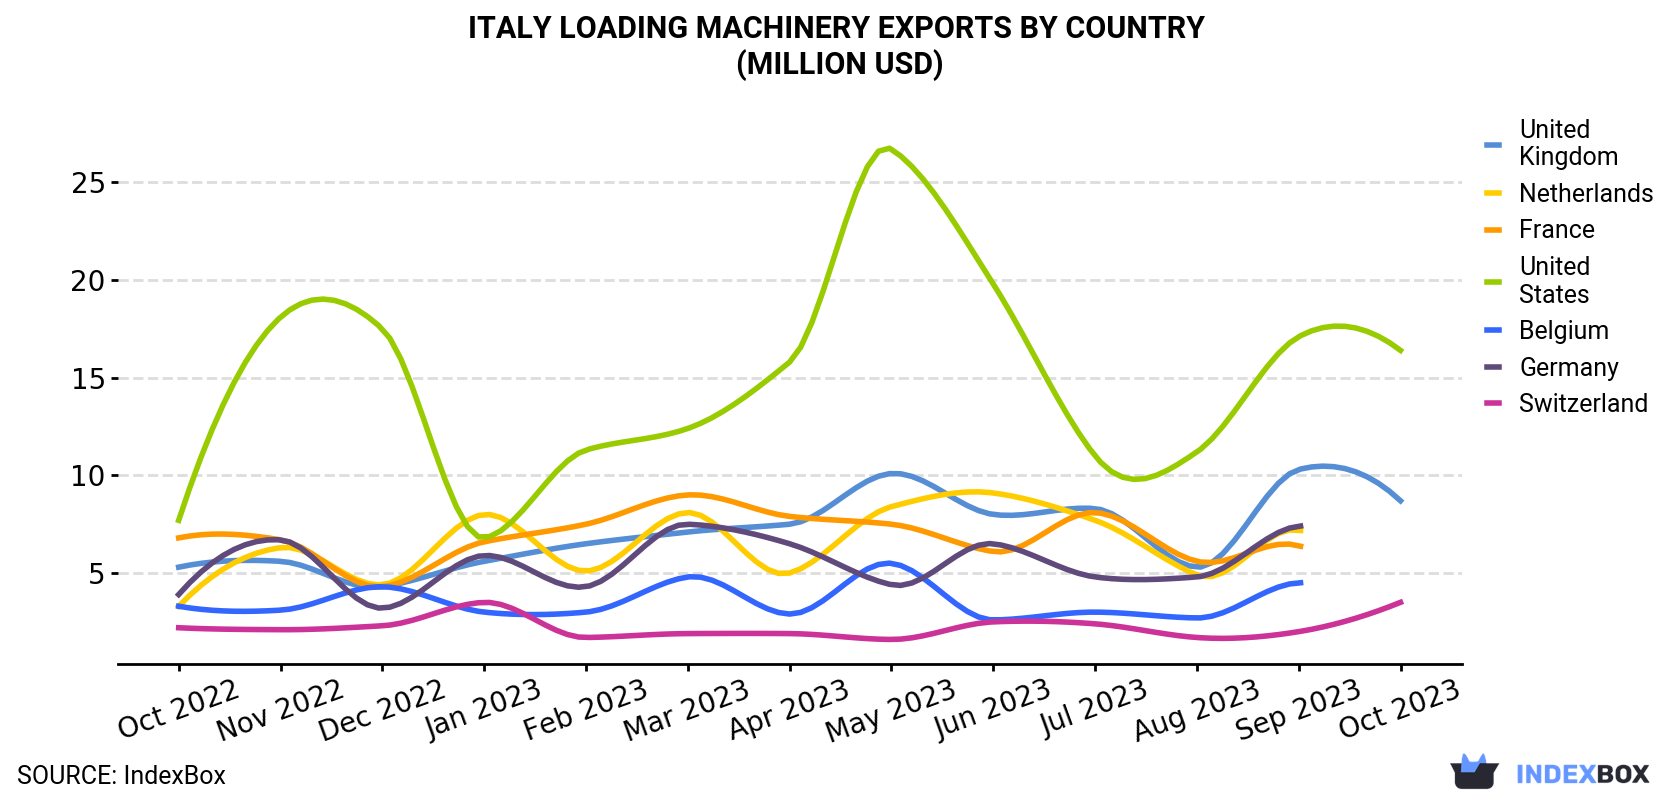 Italy Loading Machinery Exports By Country (Million USD)